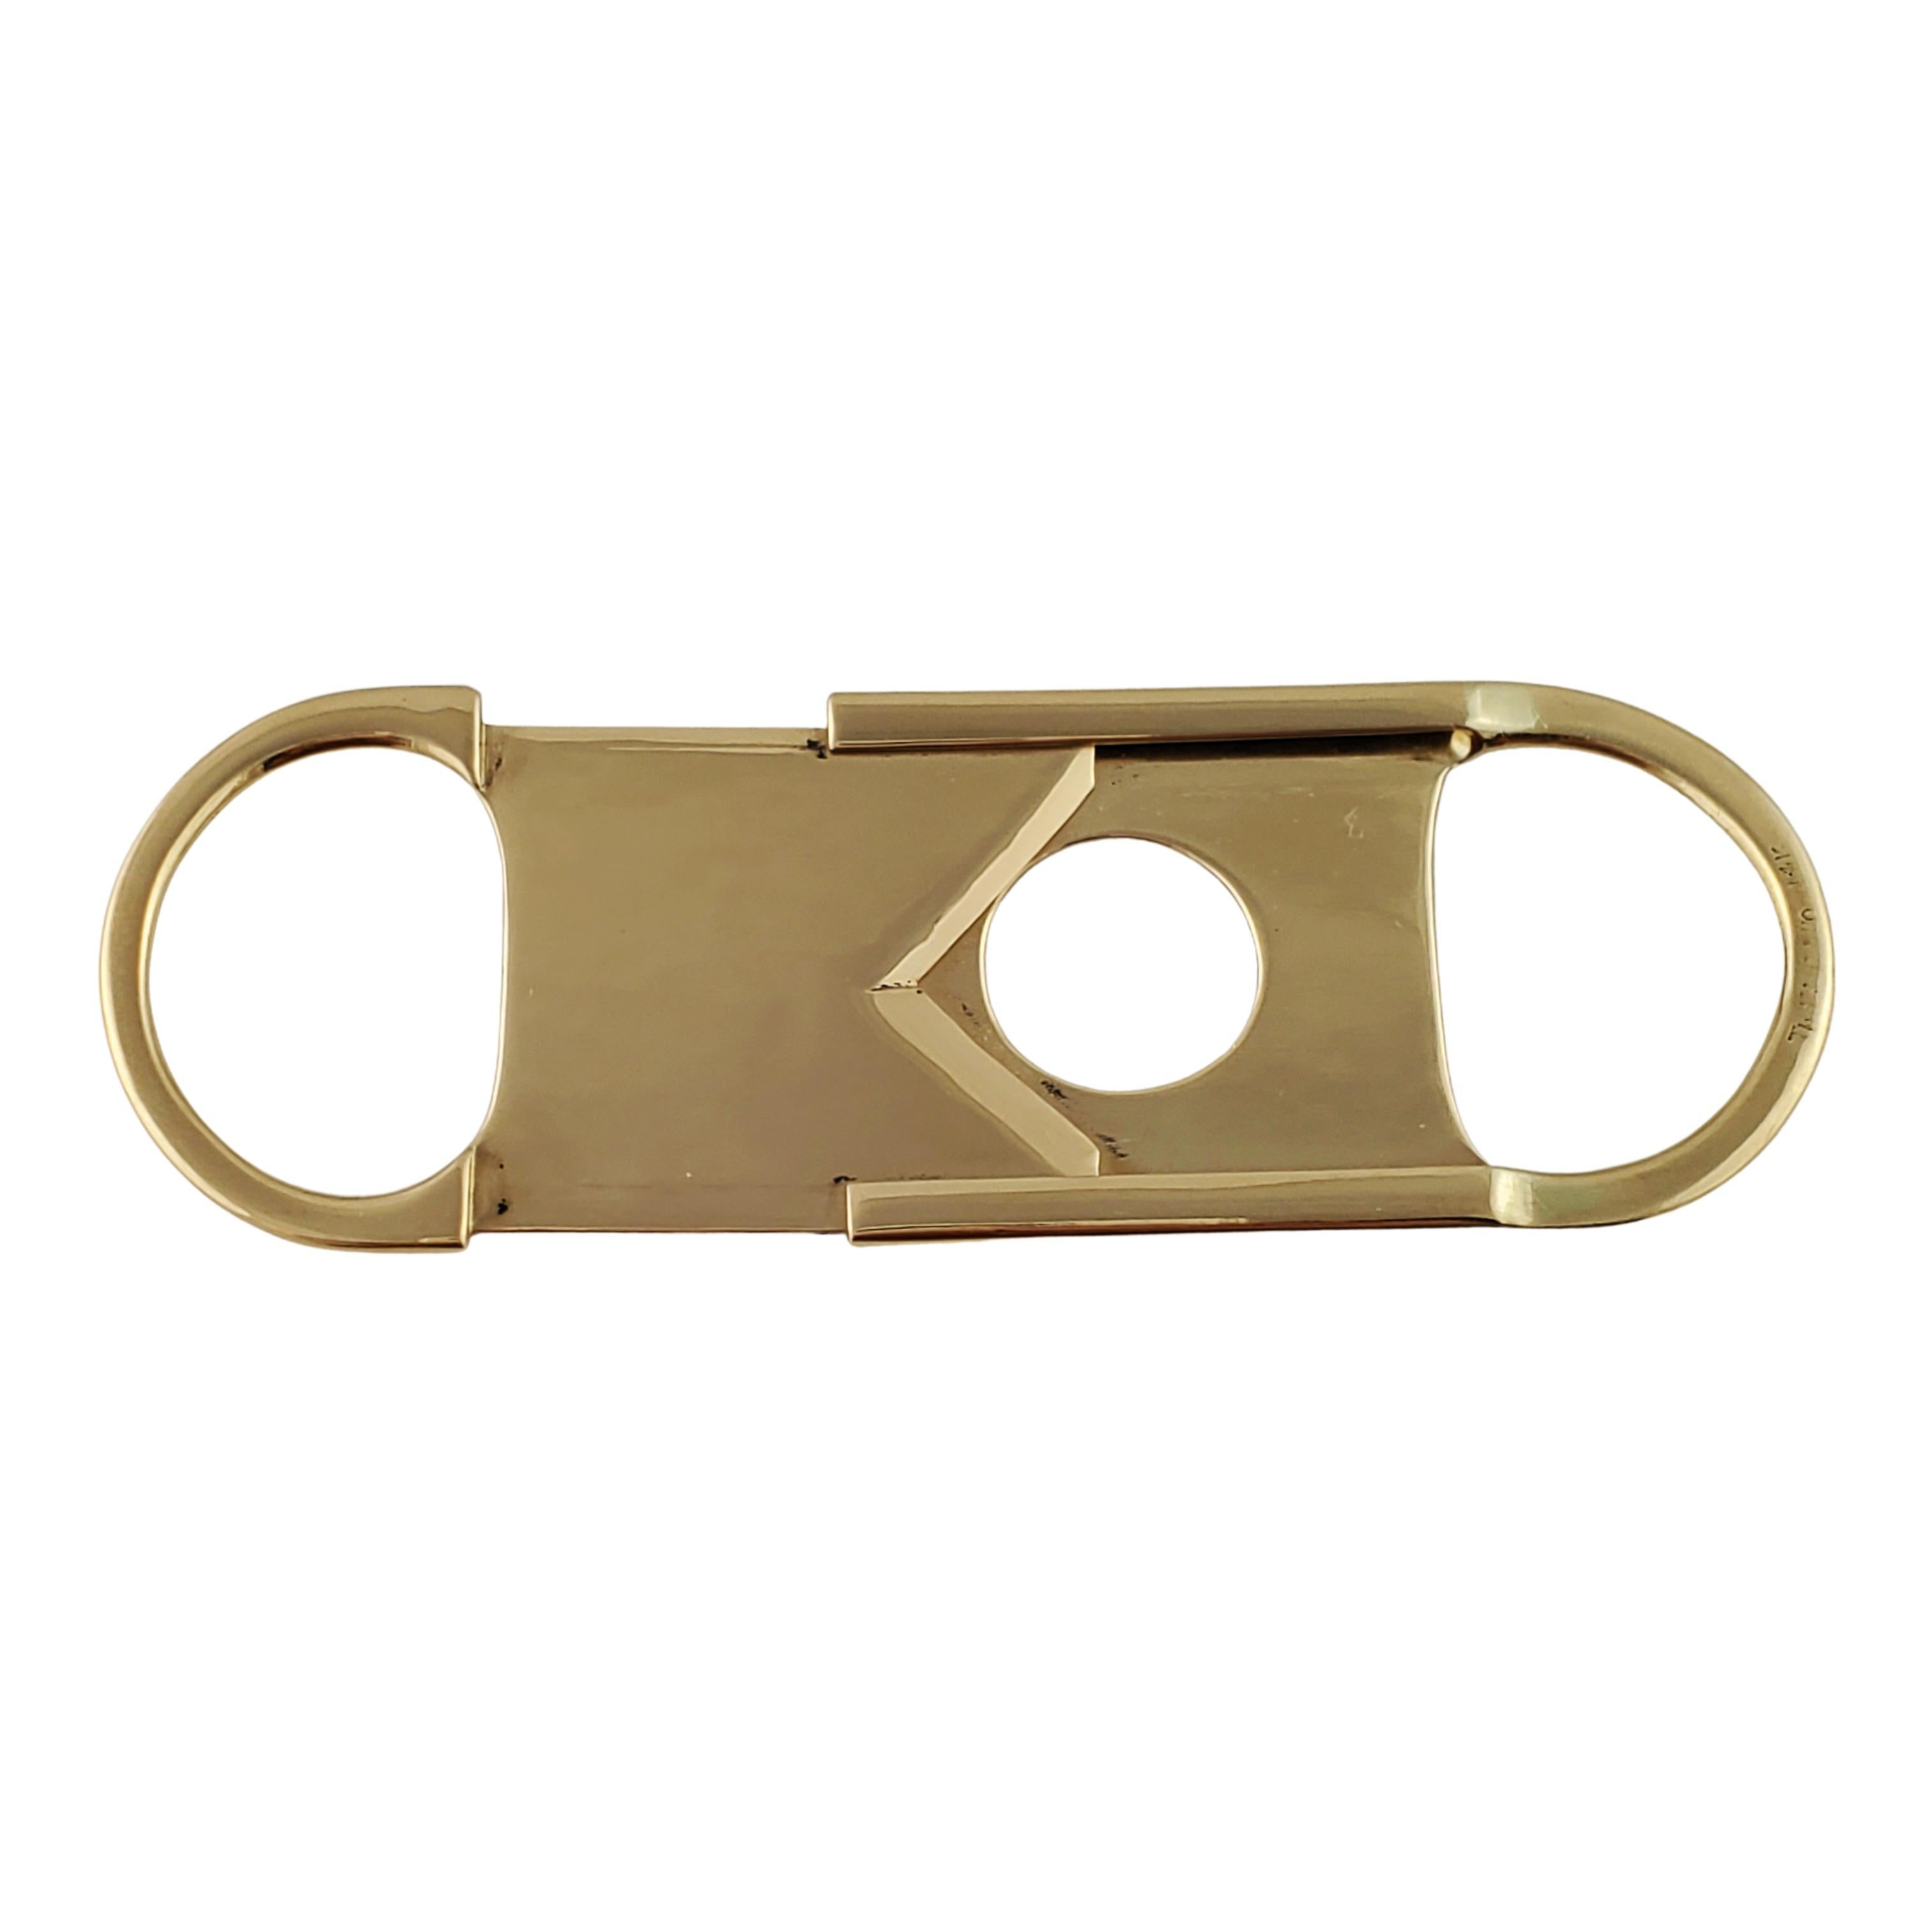 14K Yellow Gold Cigar Cutter

This beautiful cigar cutter is crafted in 14K yellow gold and fully functional.

Size: 71mm x 24mm

Weight: 10.4gr / 6.6 dwt

Tested: 14K

Very good condition, professionally polished.

Will come packaged in a gift box